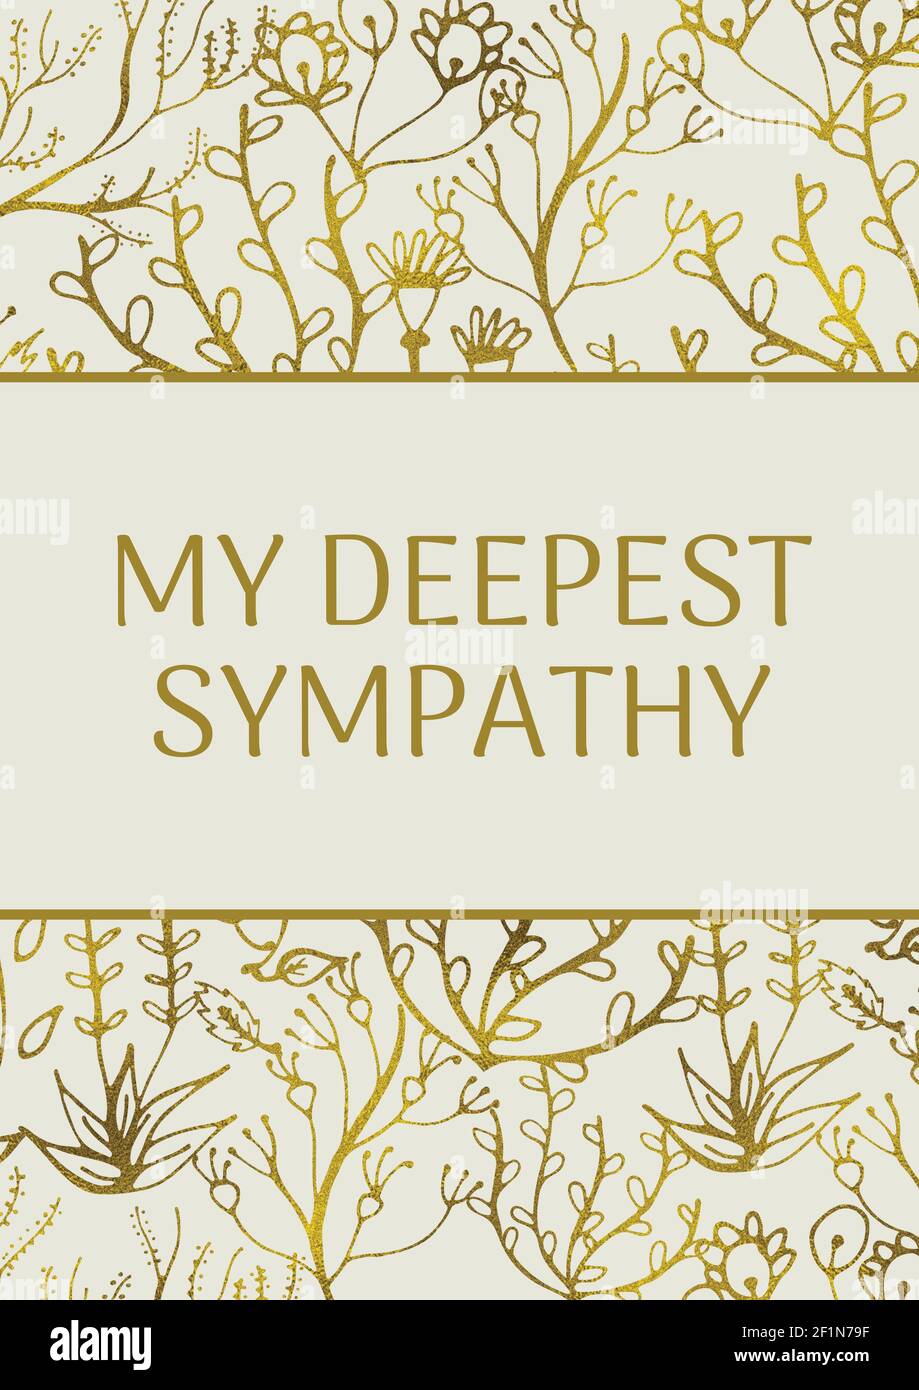 My deepest sympathy text with illustration of flowers on cream background Stock Photo